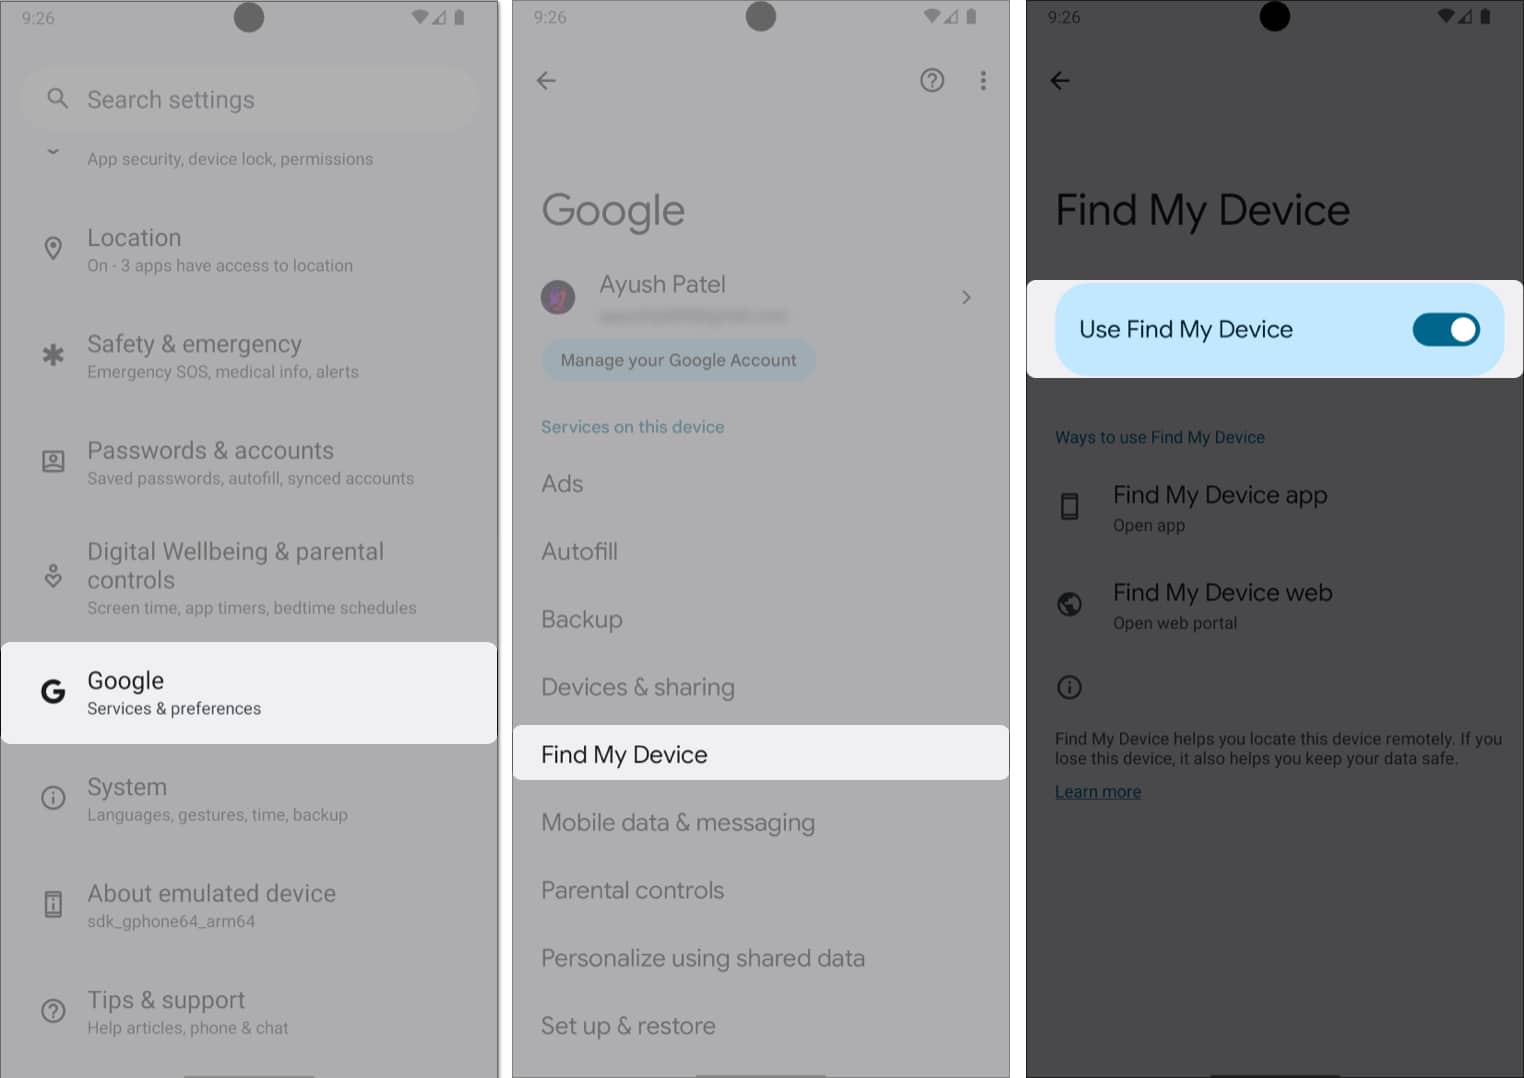 Open Settings, Select Google, Tap Find My Device, and Then turn on Use Find My Device